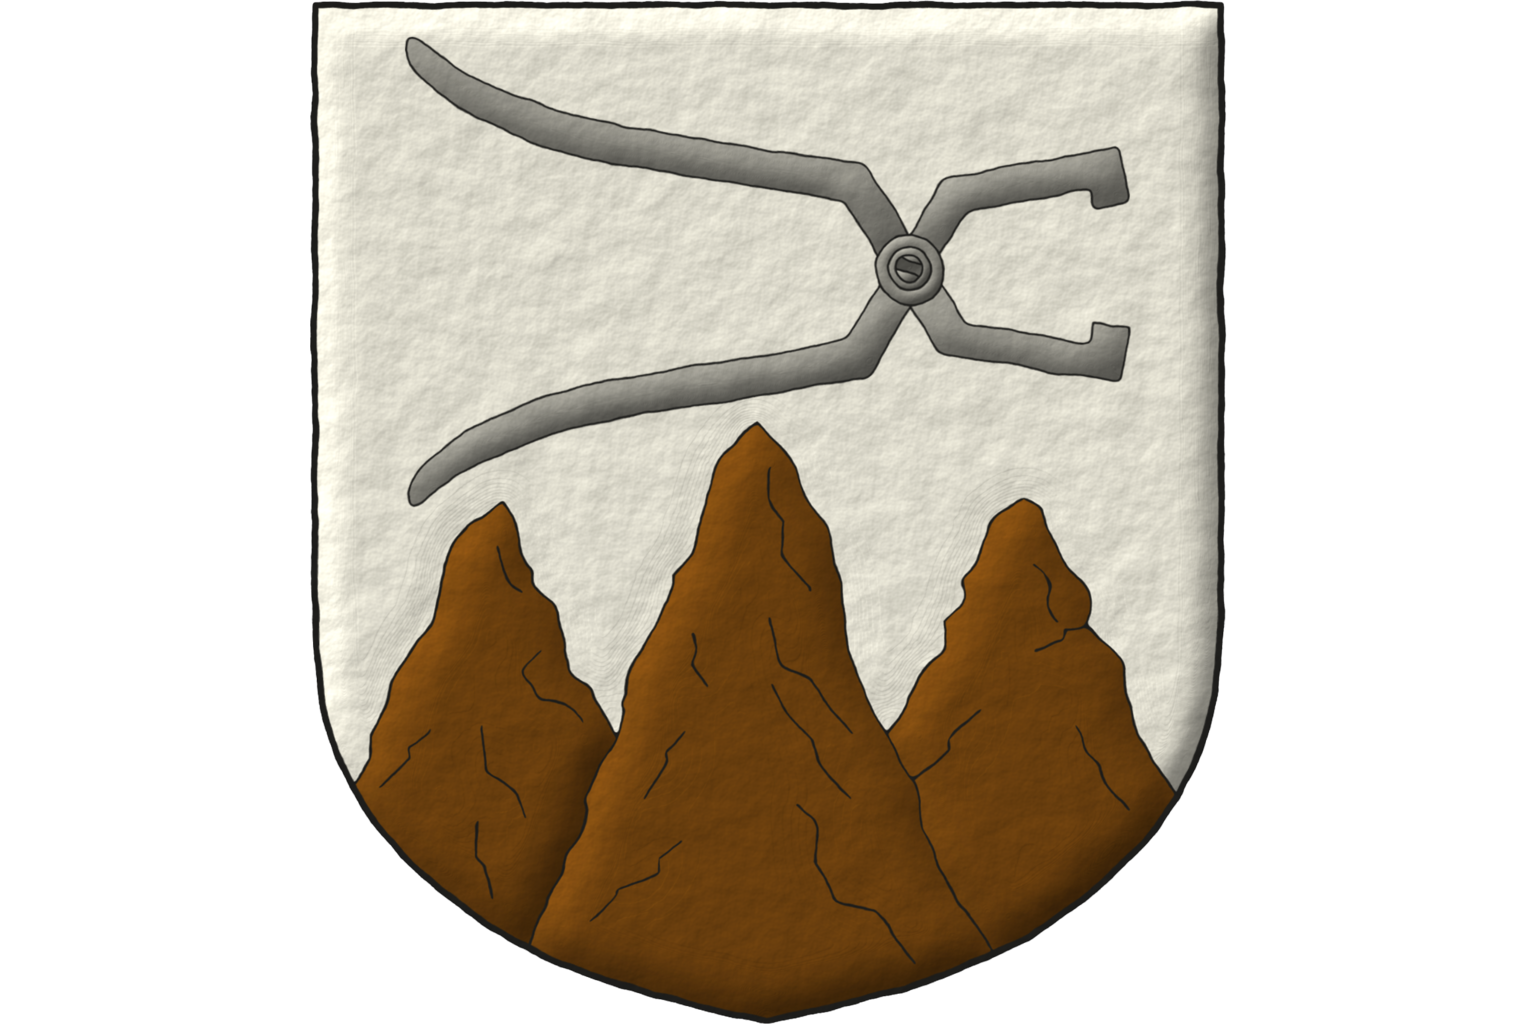 Escutcheon Argent, in base a trimount, in chief a pair of open pliers bend sinisterwise proper.